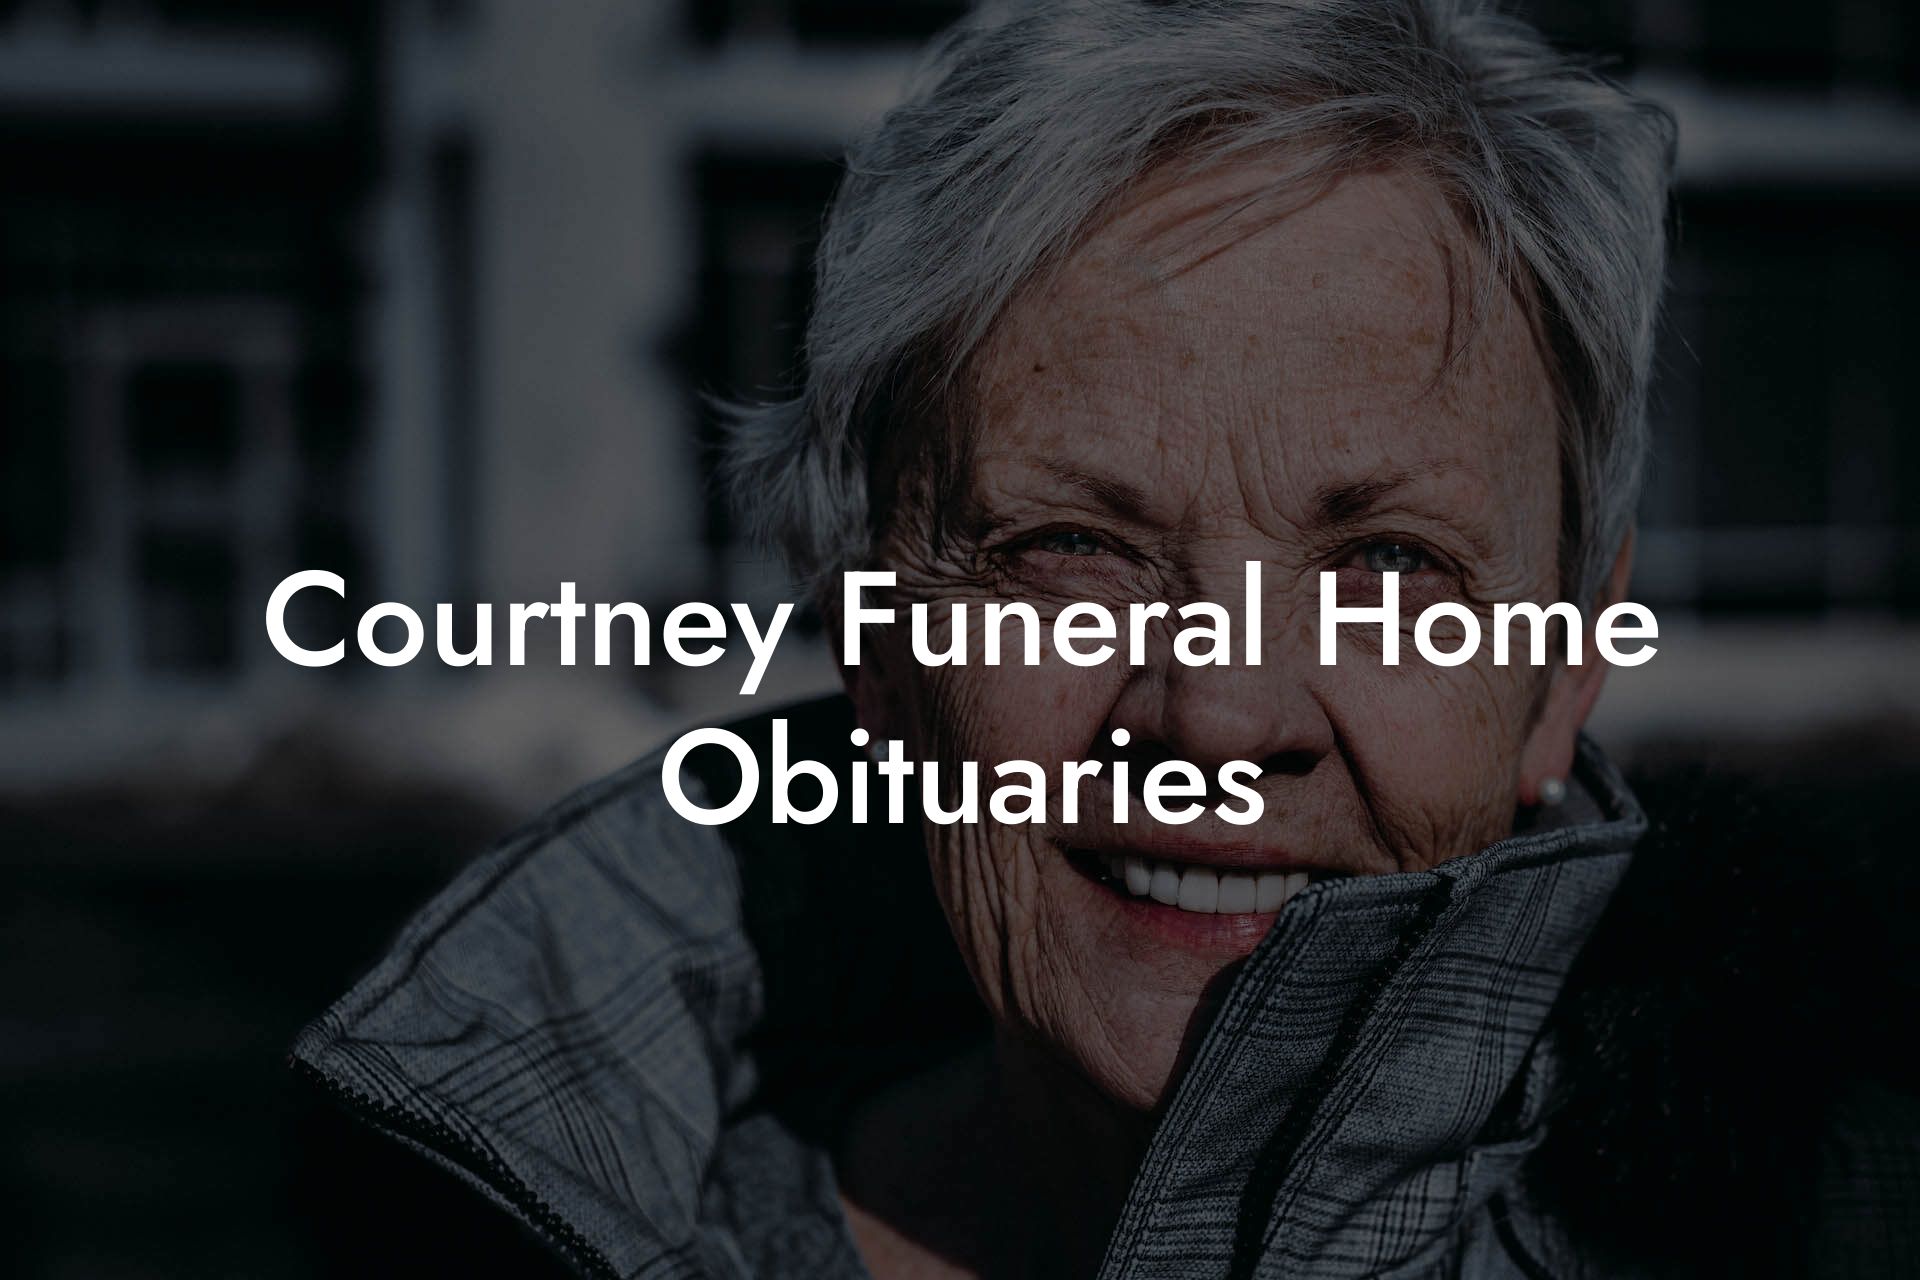 Courtney Funeral Home Obituaries